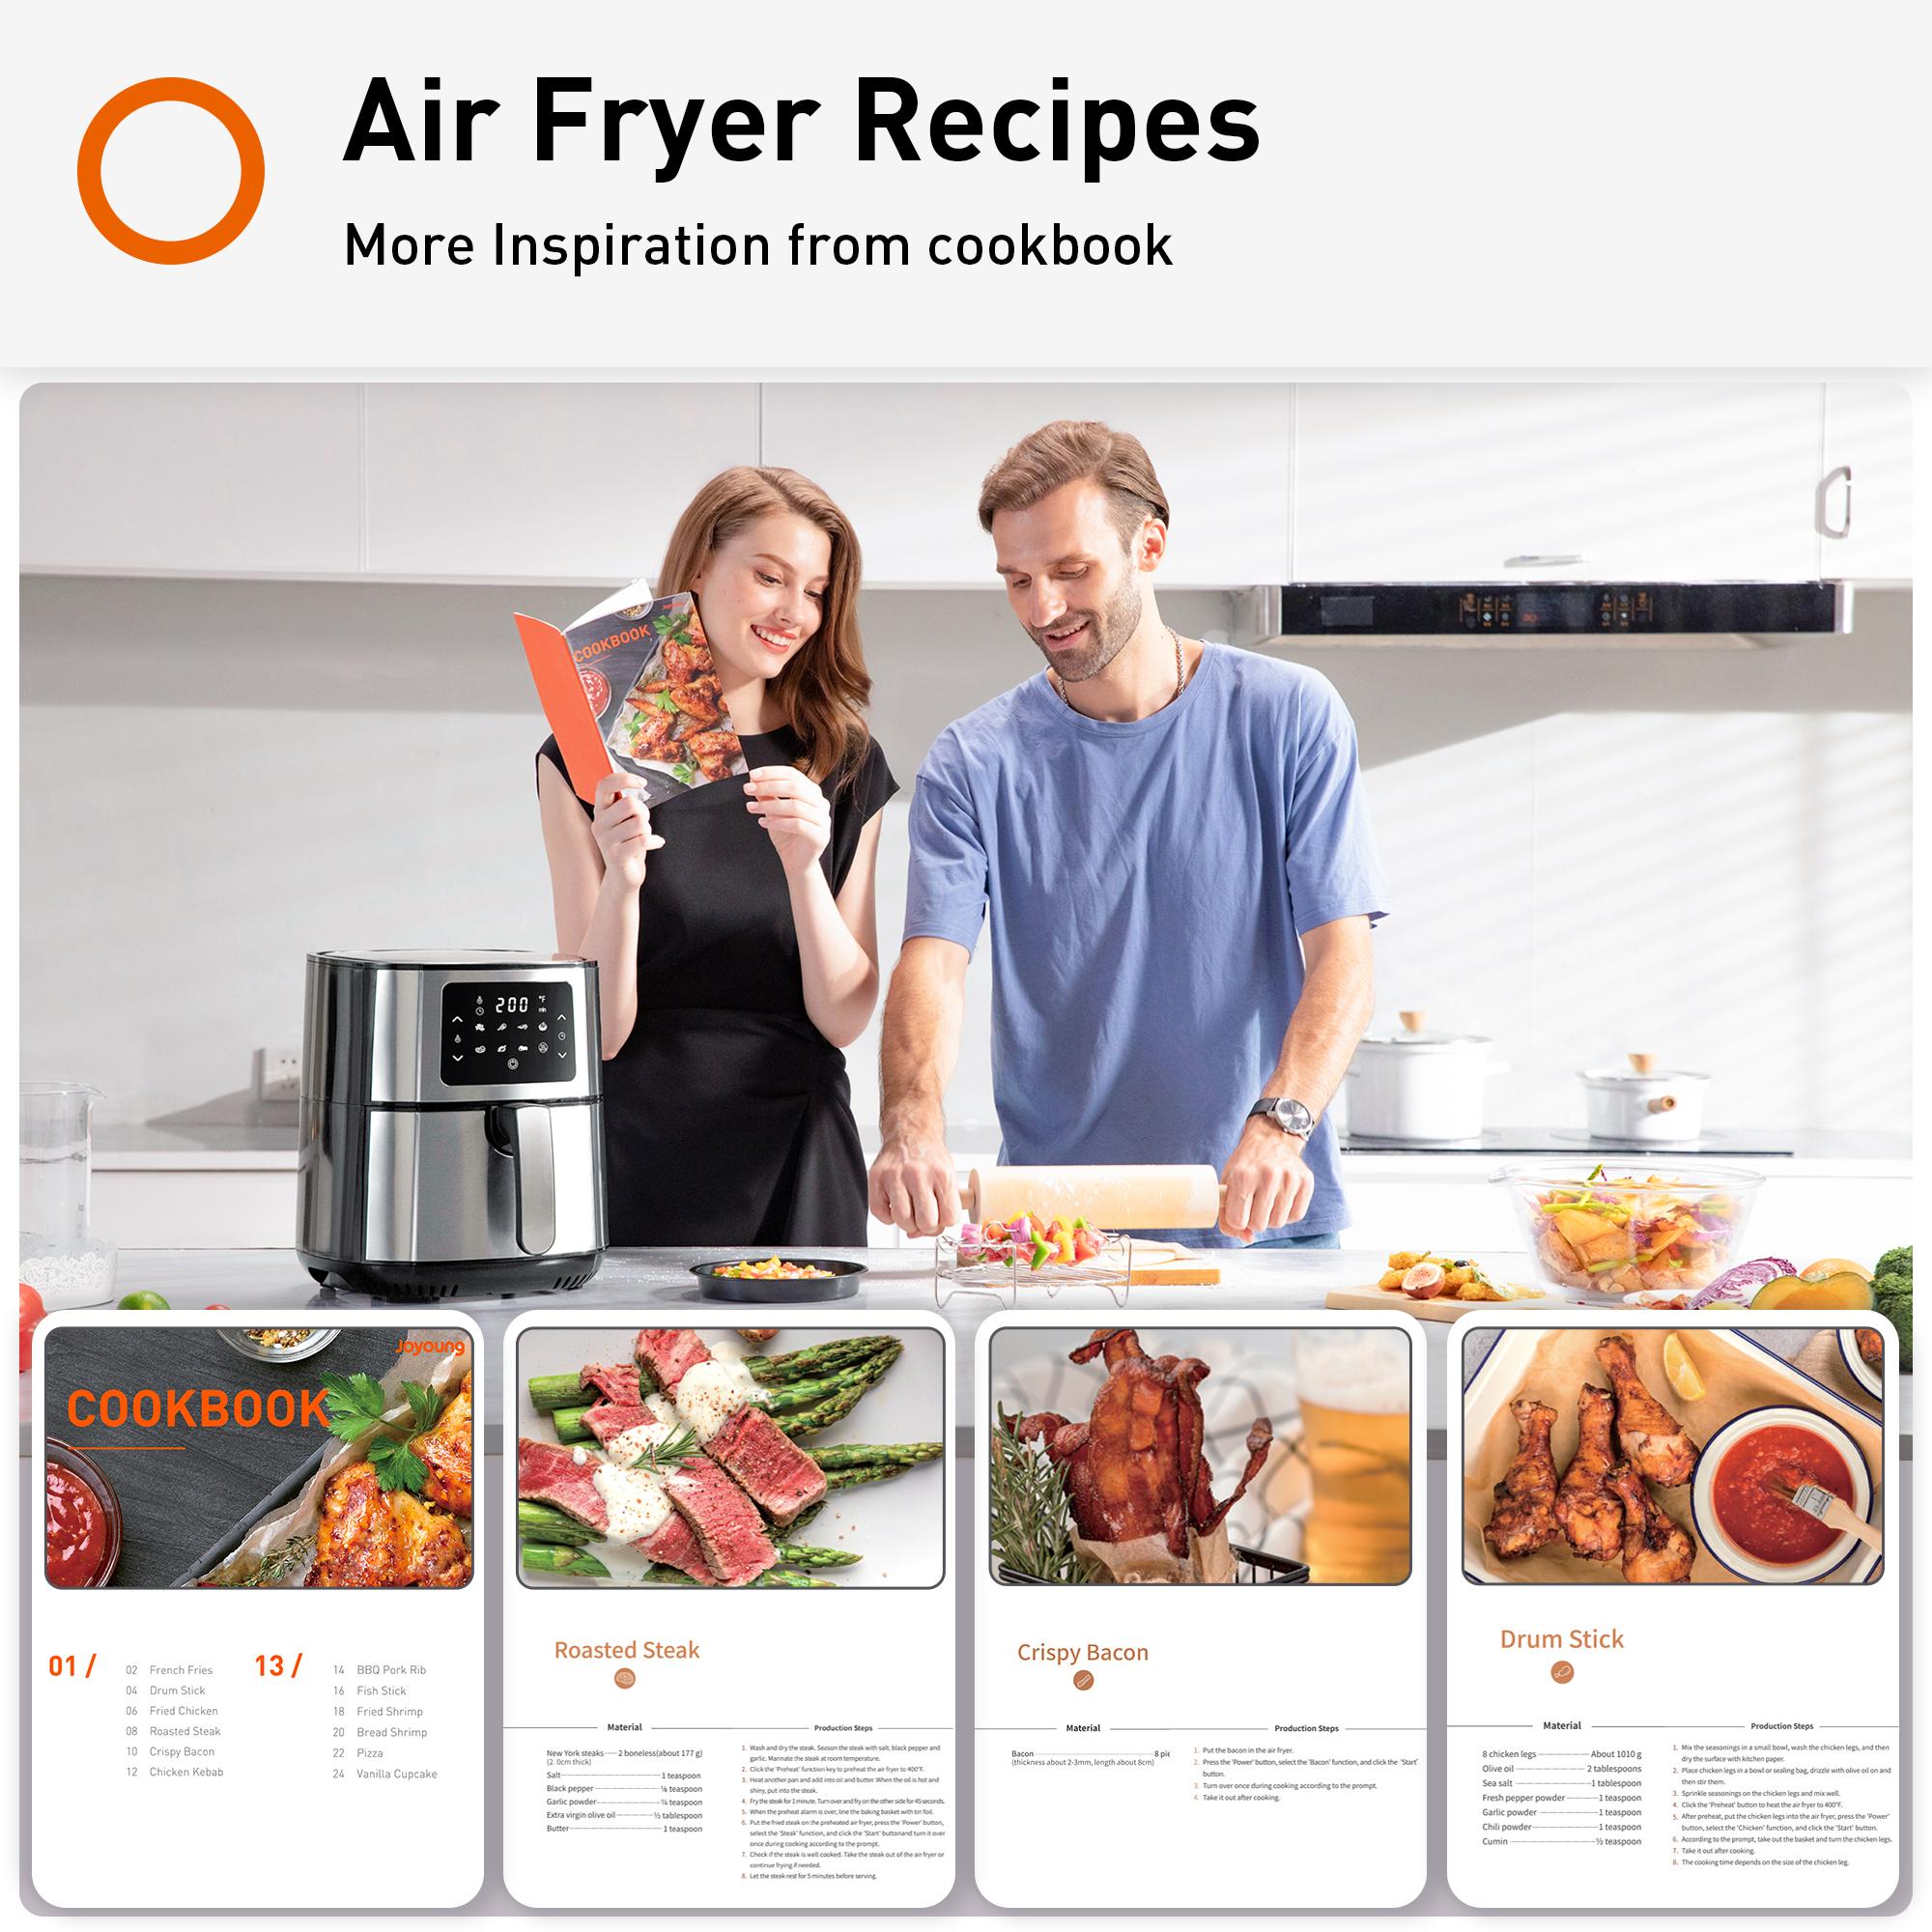 JOYOUNG Air Fryer Oven 5.8Qt Big Capacity Air Fryer Toaster Oven, 8 Presets with AirFryer Cookbook, 1400W, LED Digital Screen,